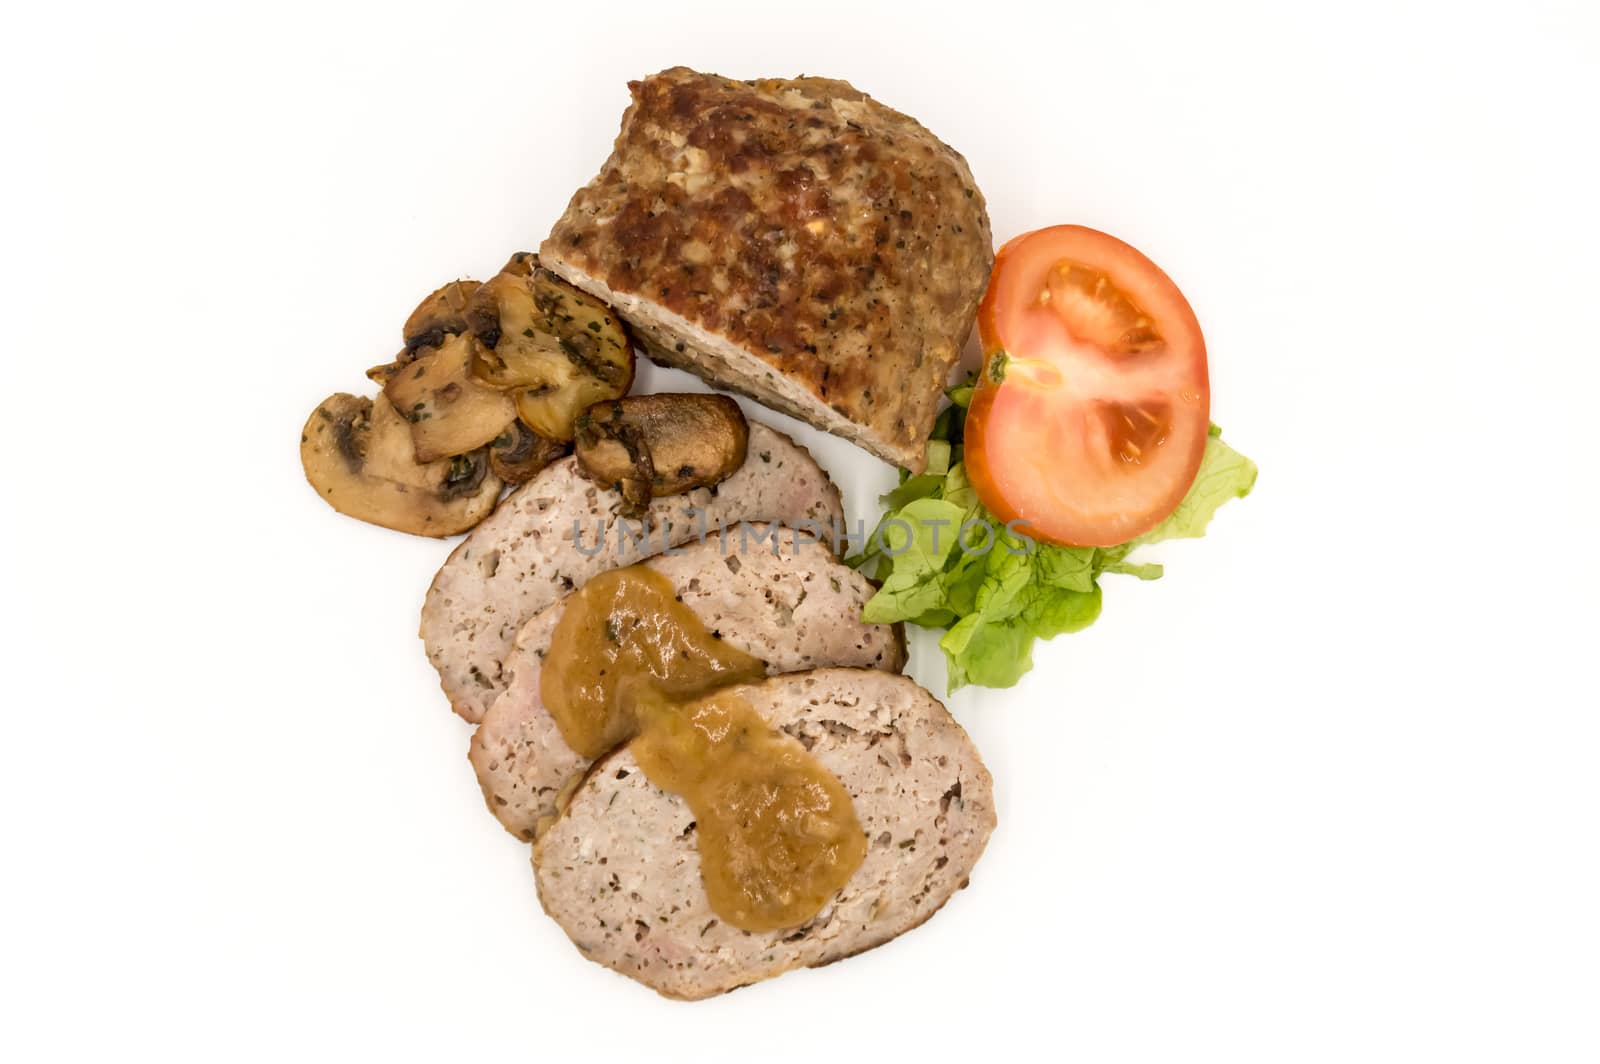 Meatloaf cut into slices with mushrooms, tomato and salad top view on an isolated white background.